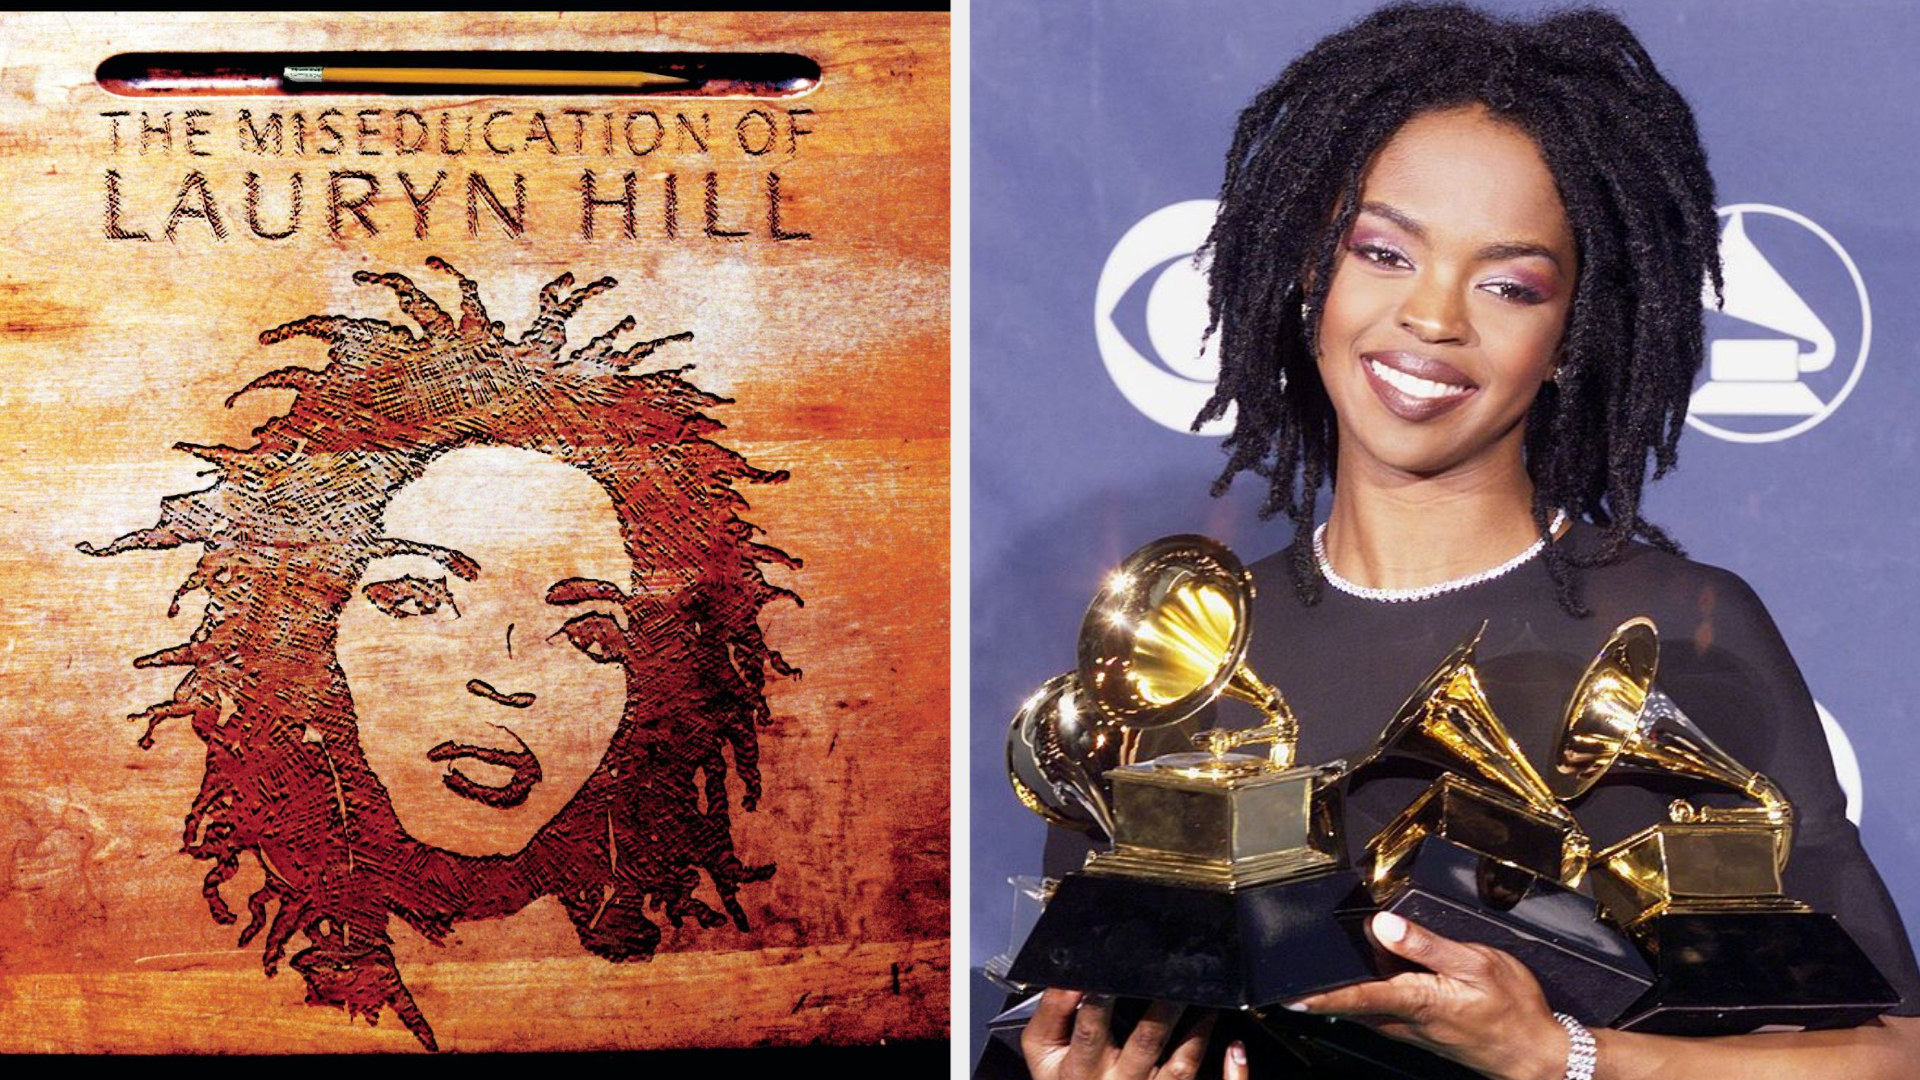 The cover of &quot;The Miseducation of Lauryn Hill&quot;; Lauryn Hill winning at the 1999 Grammys